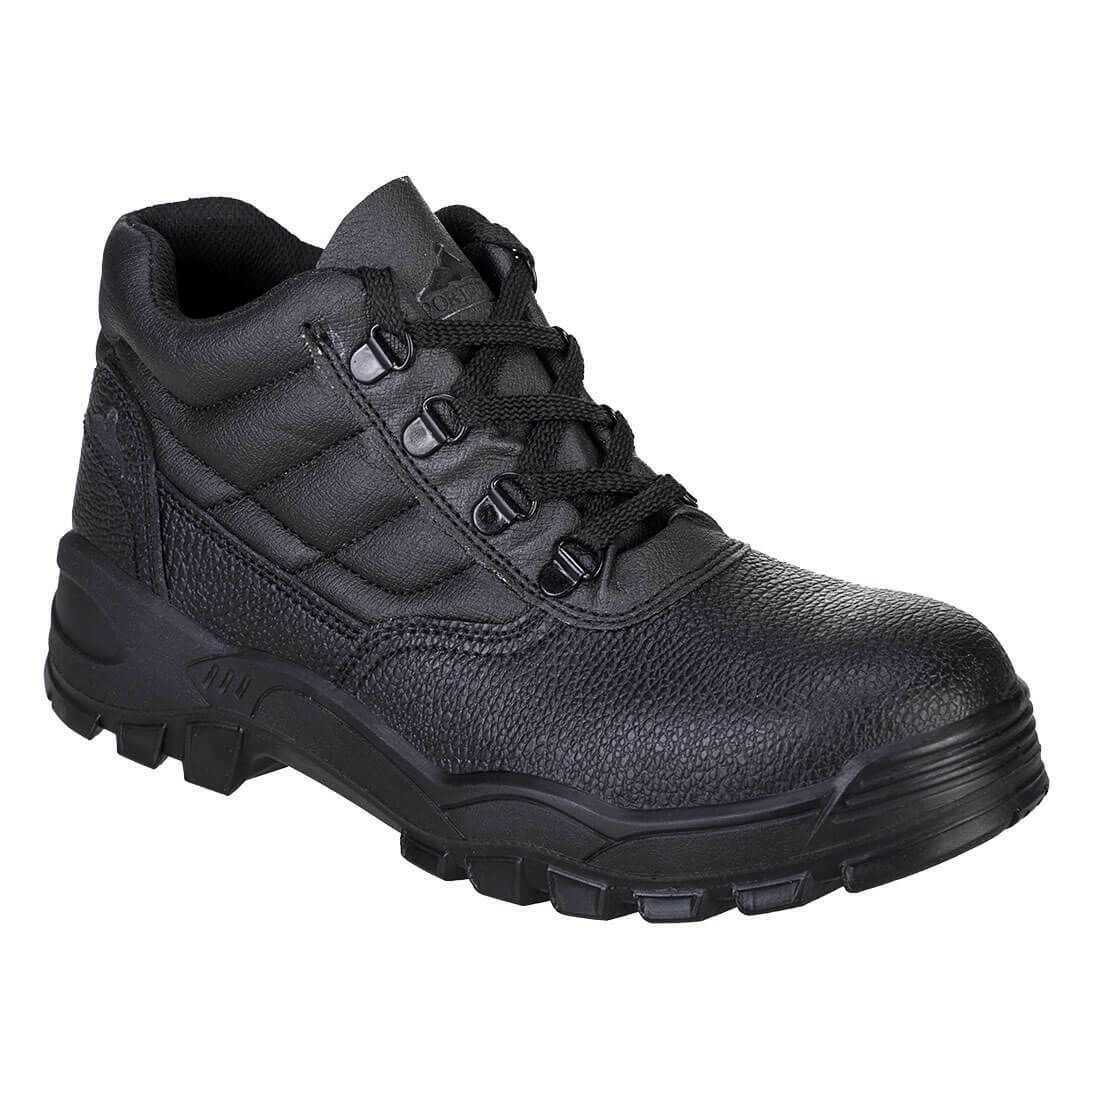 Portwest Mens Steelite Protector Boots S1P Work Safety Protective Toecap FW10